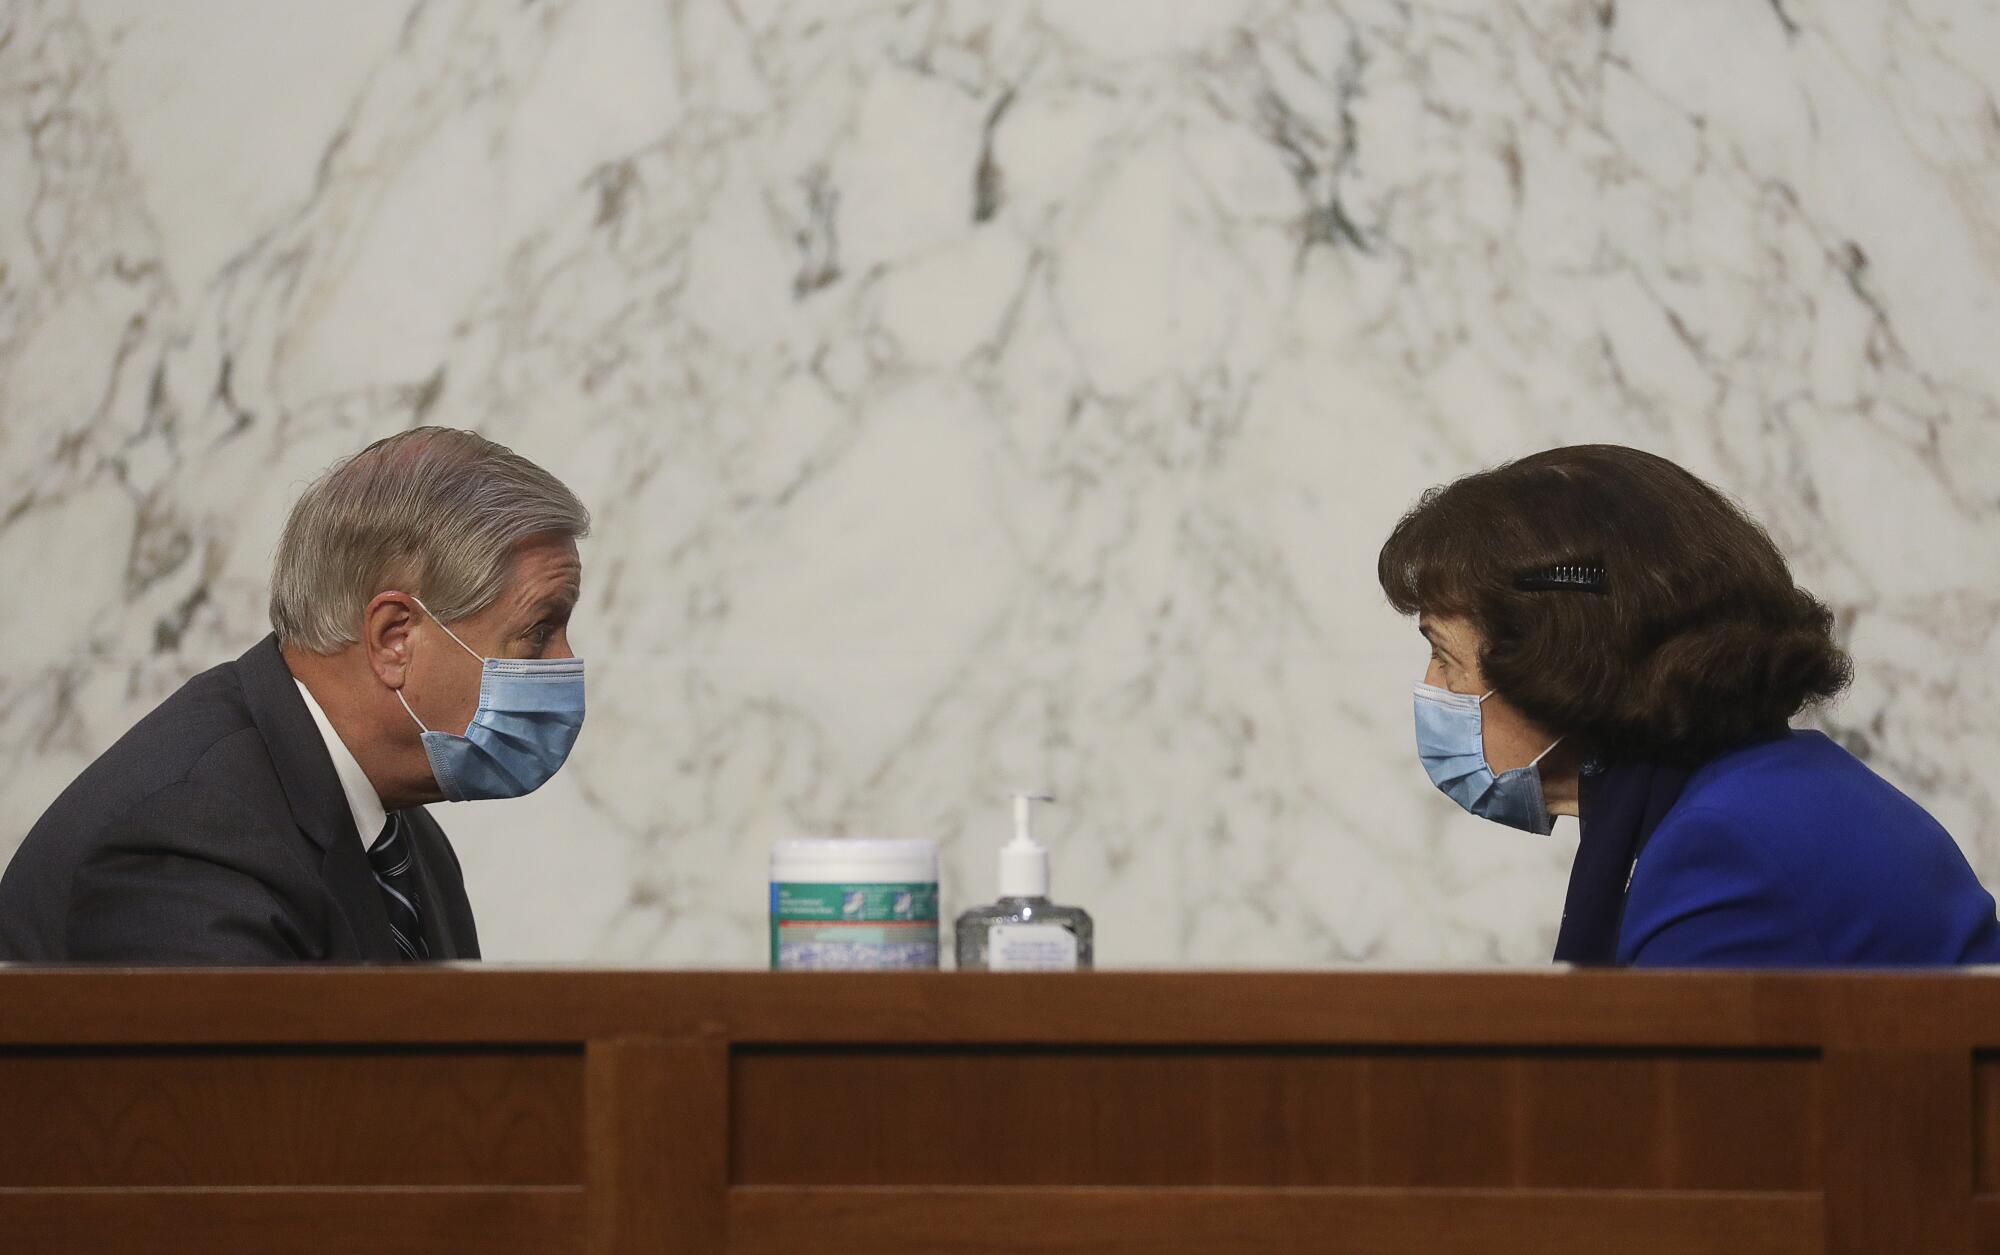 With wipes and hand sanitizer between them, Lindsey Graham and Dianne Feinstein, wearing masks, chat.